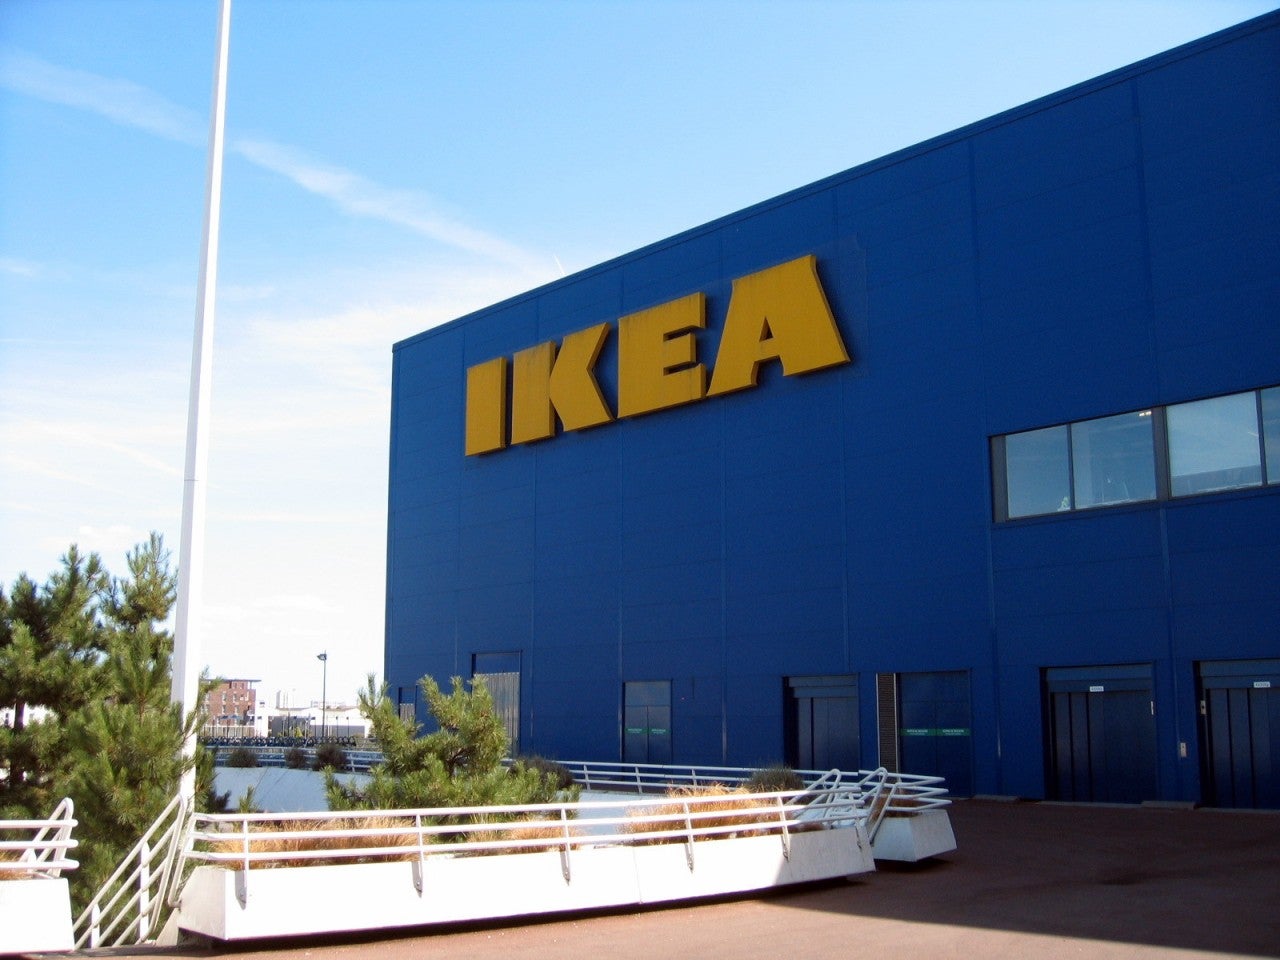 IKEA France fined $1.2m by court for employee surveillance